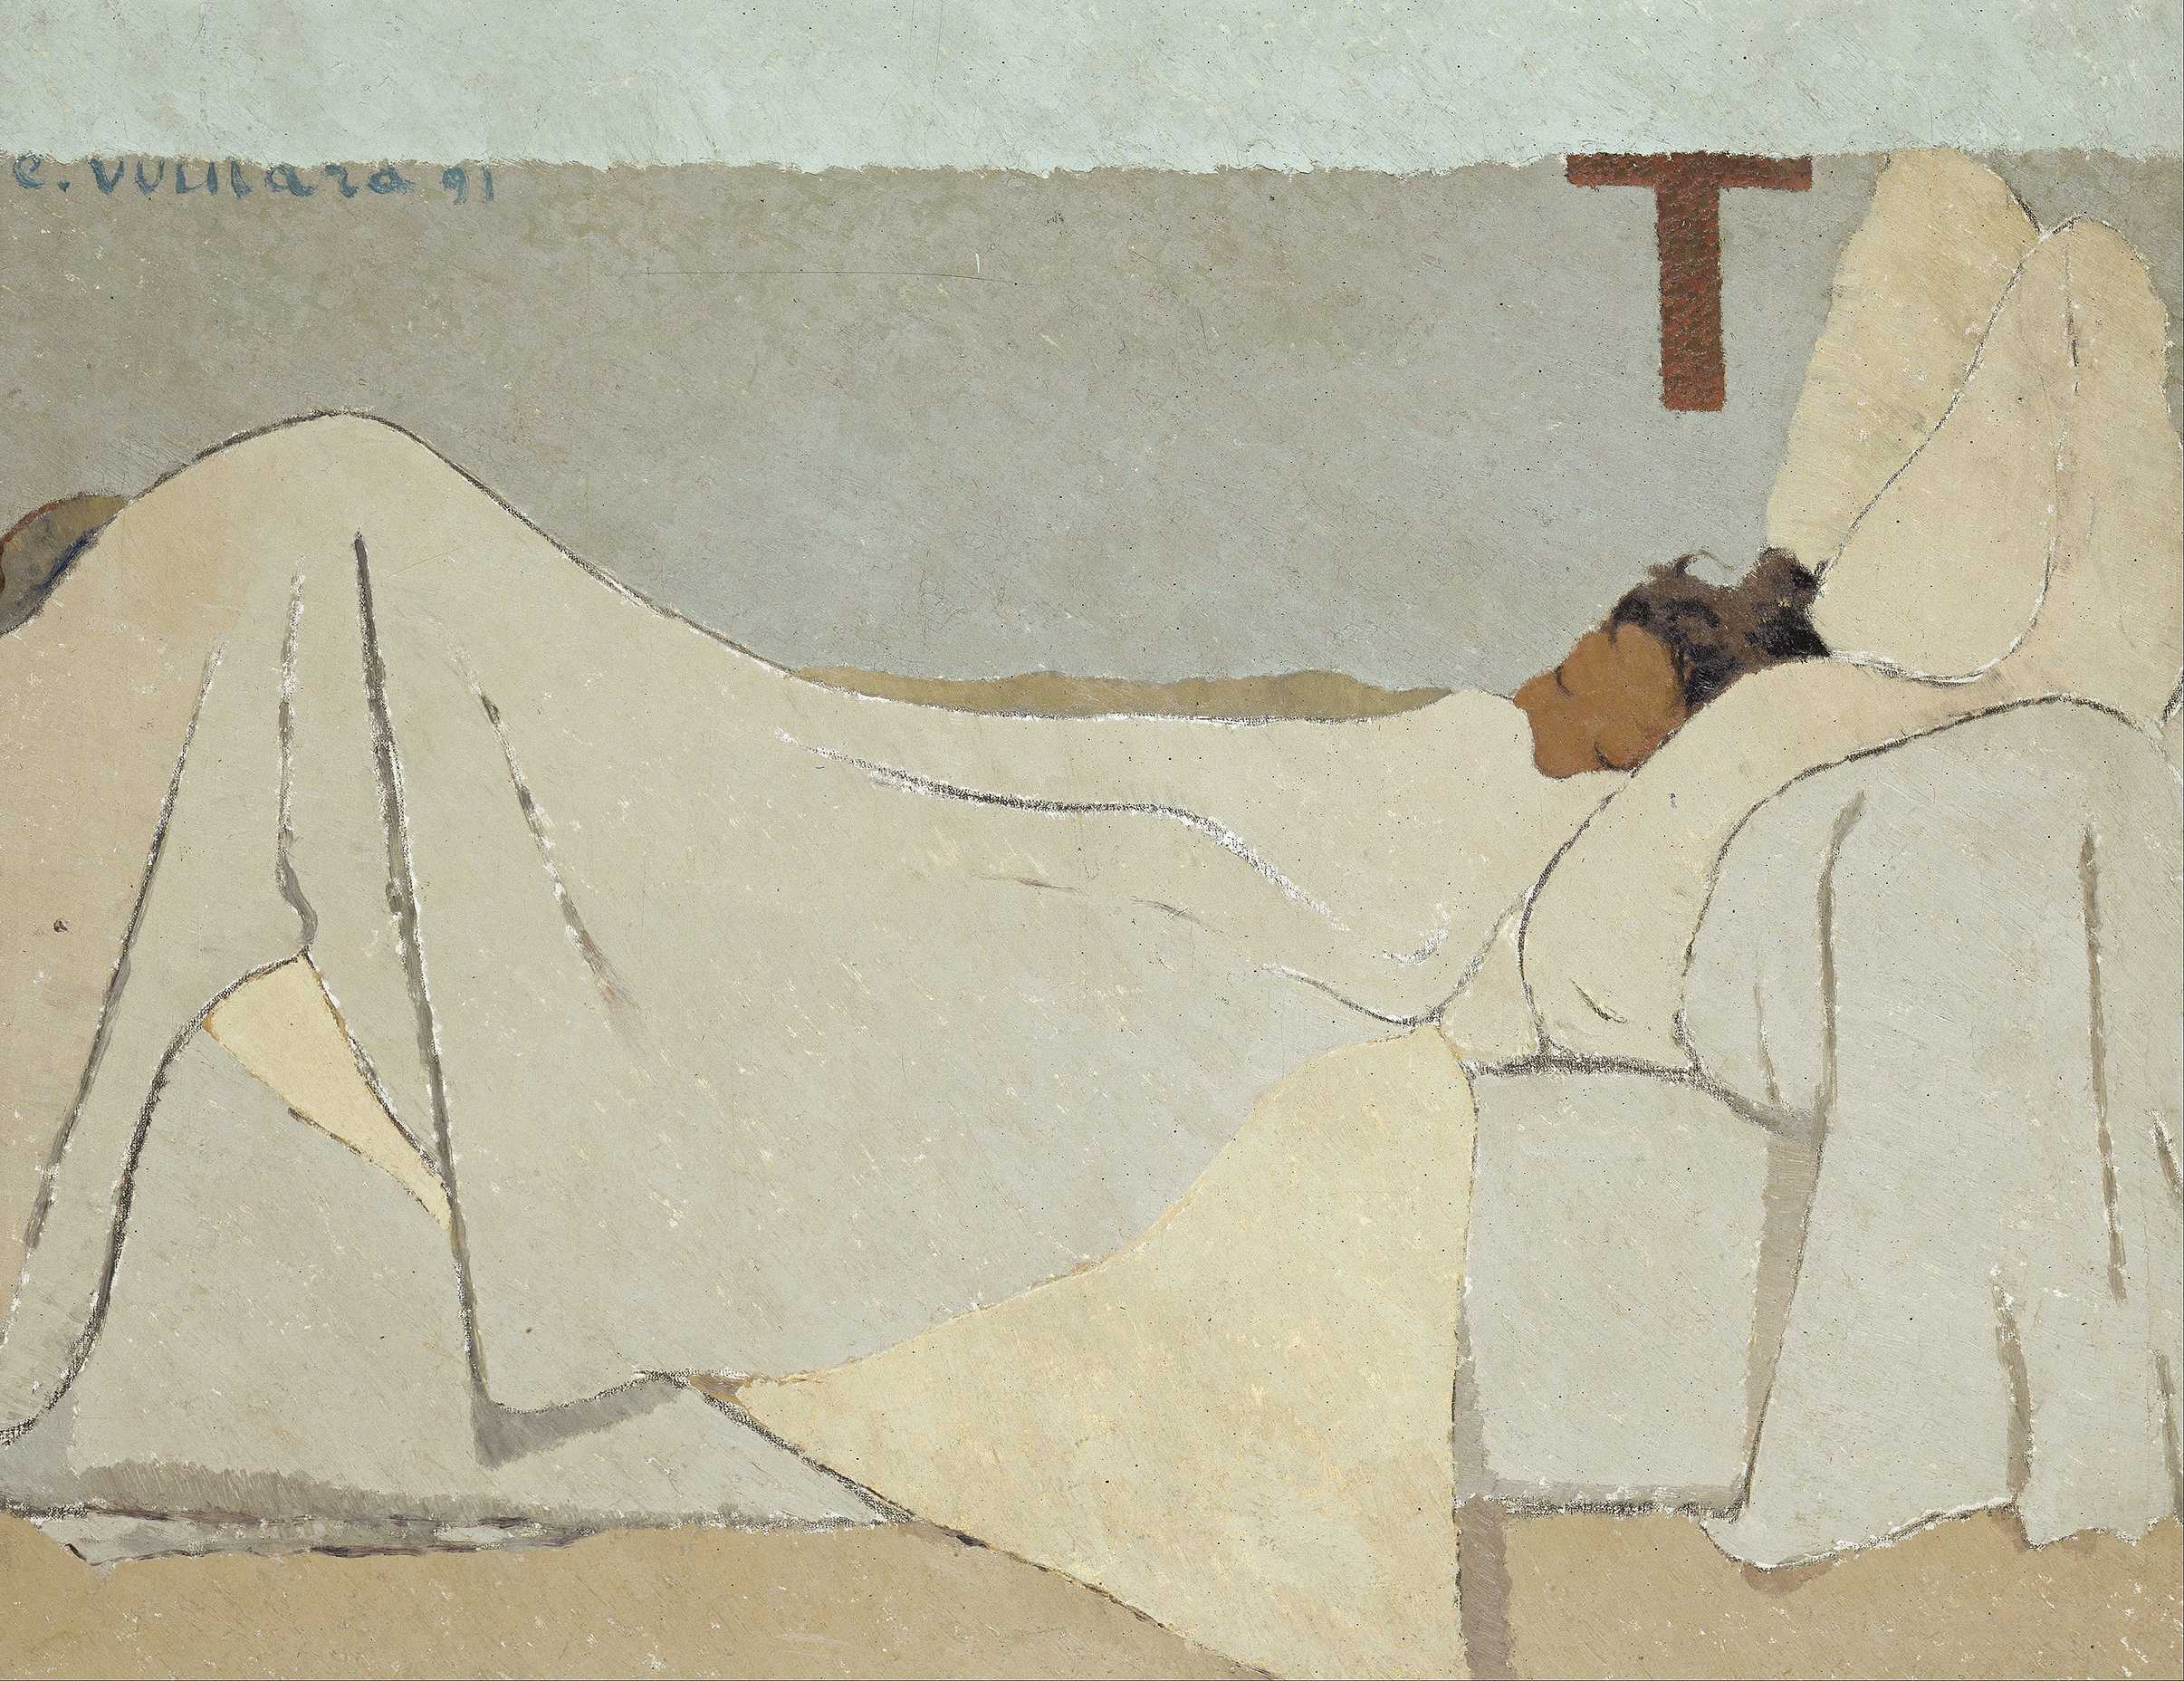 Find out more about Édouard Vuillard - In Bed